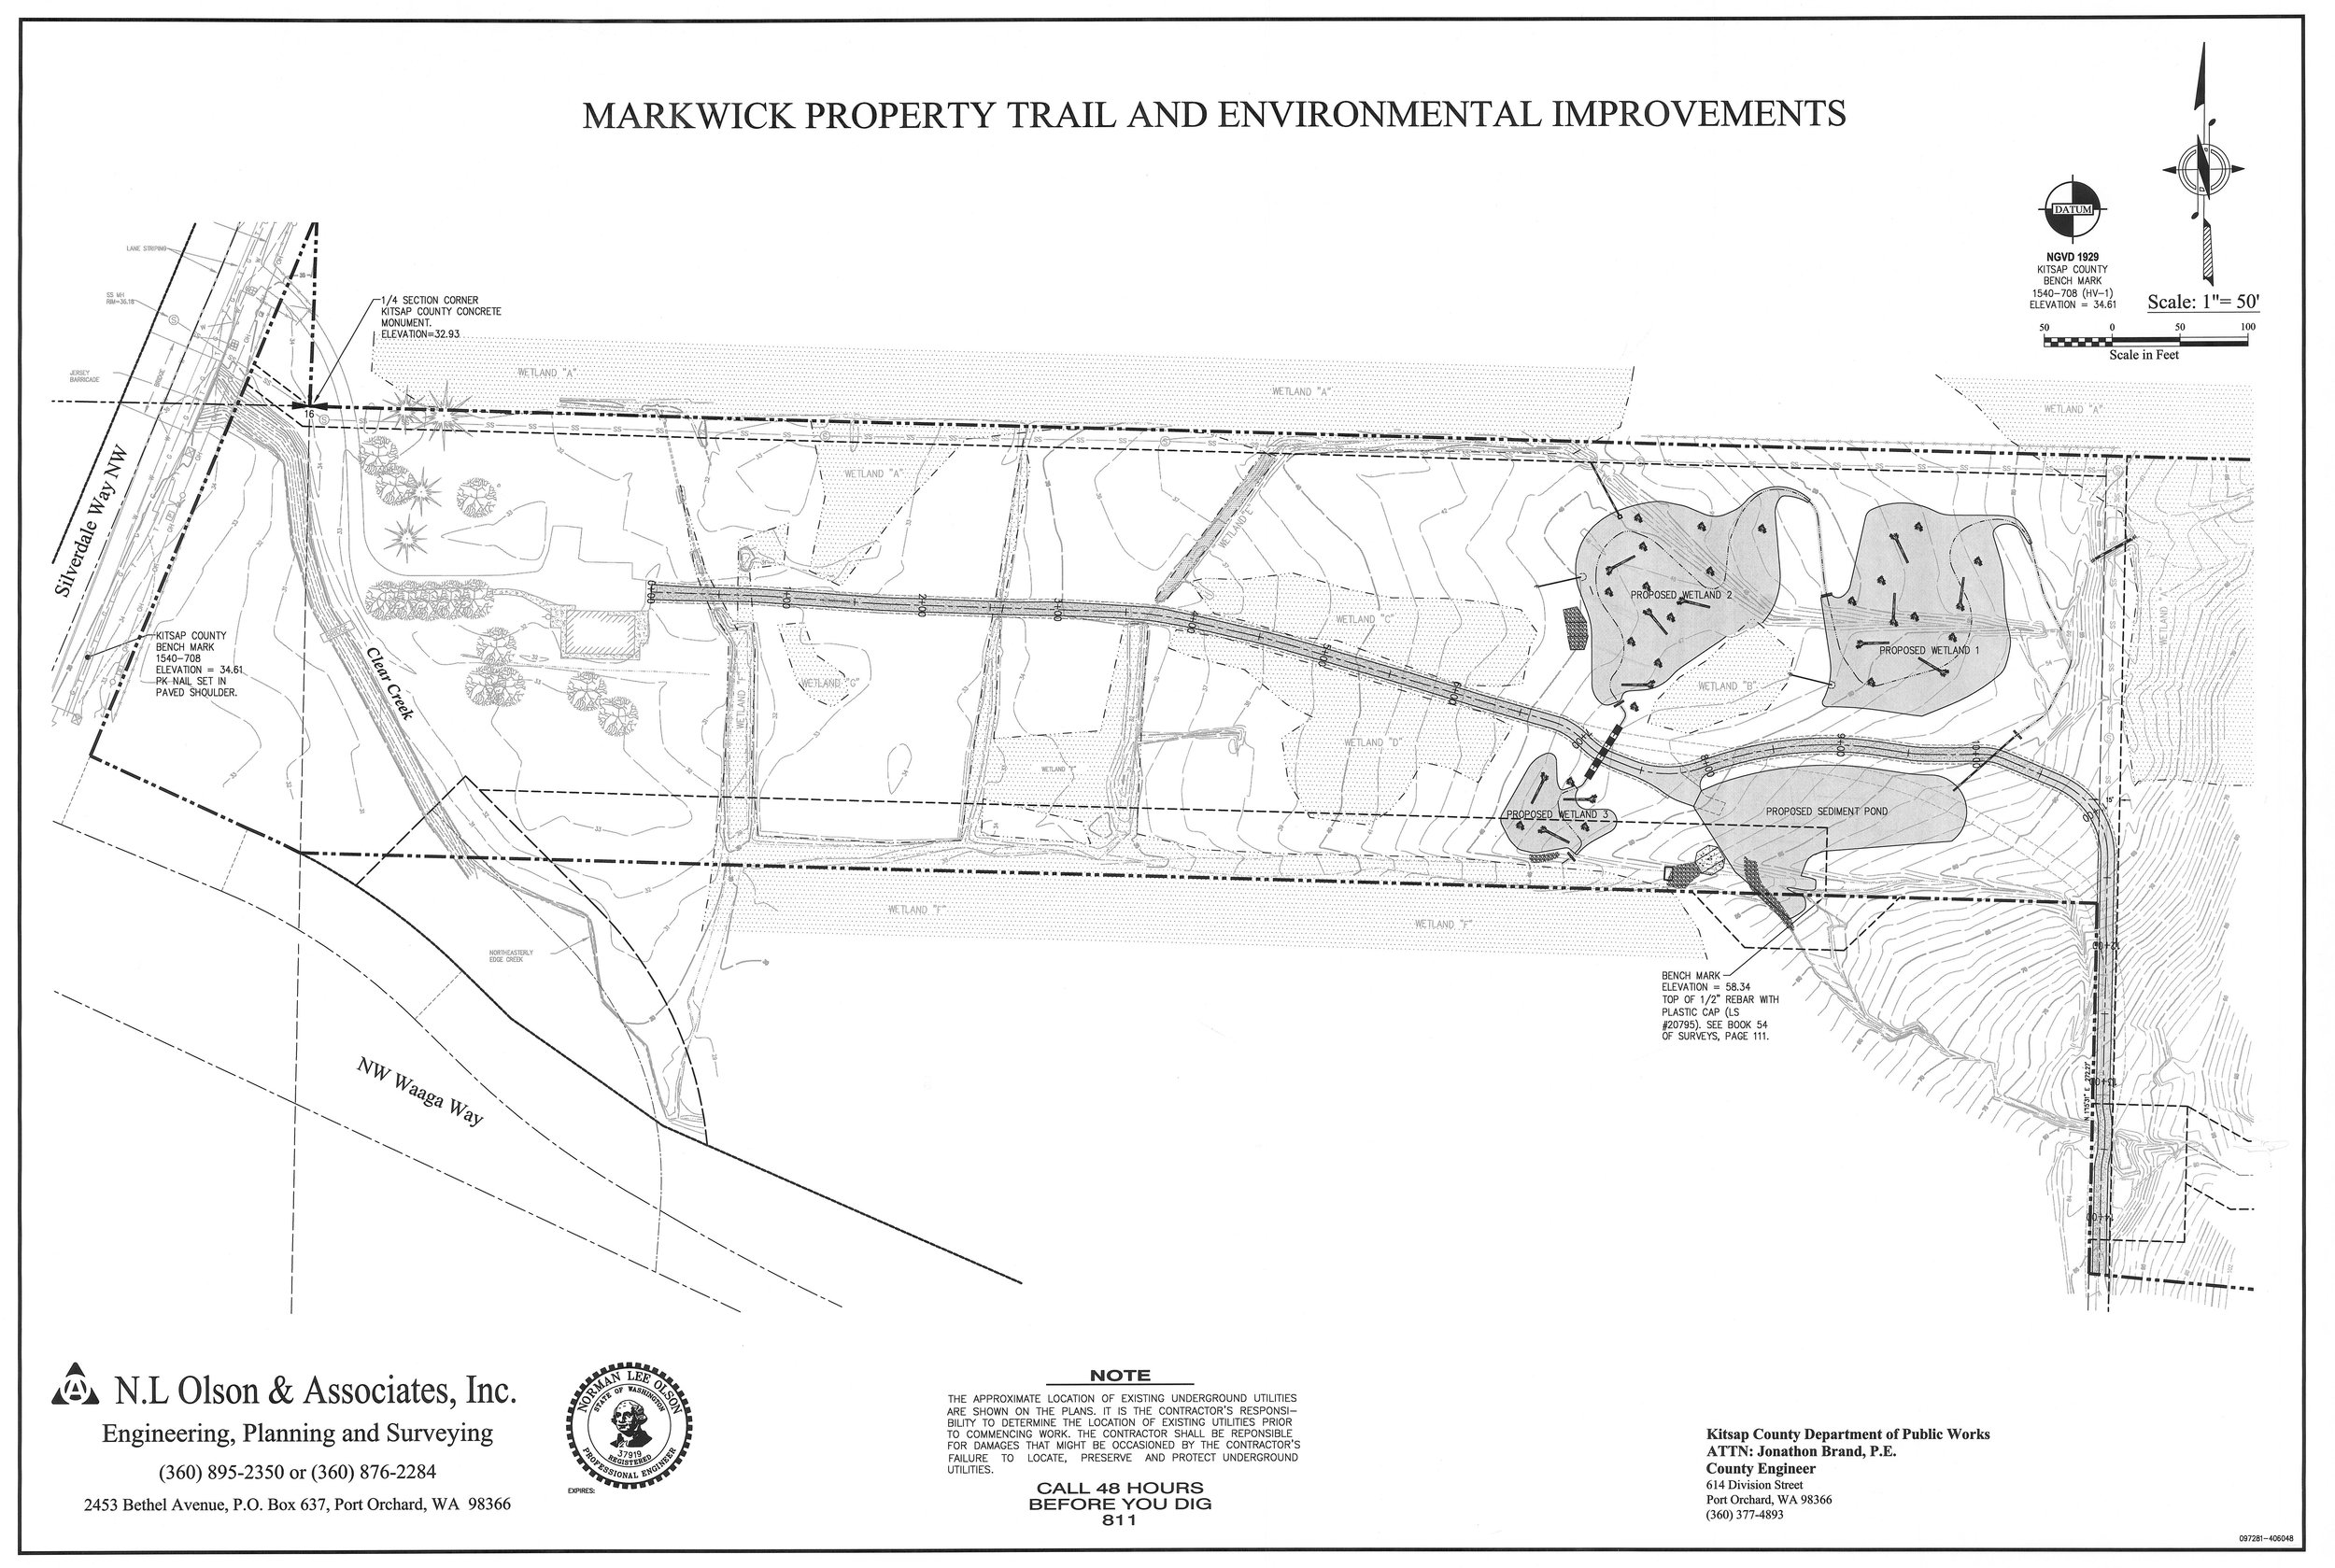 Markwick Property Trail plan - Not Constructed.jpg